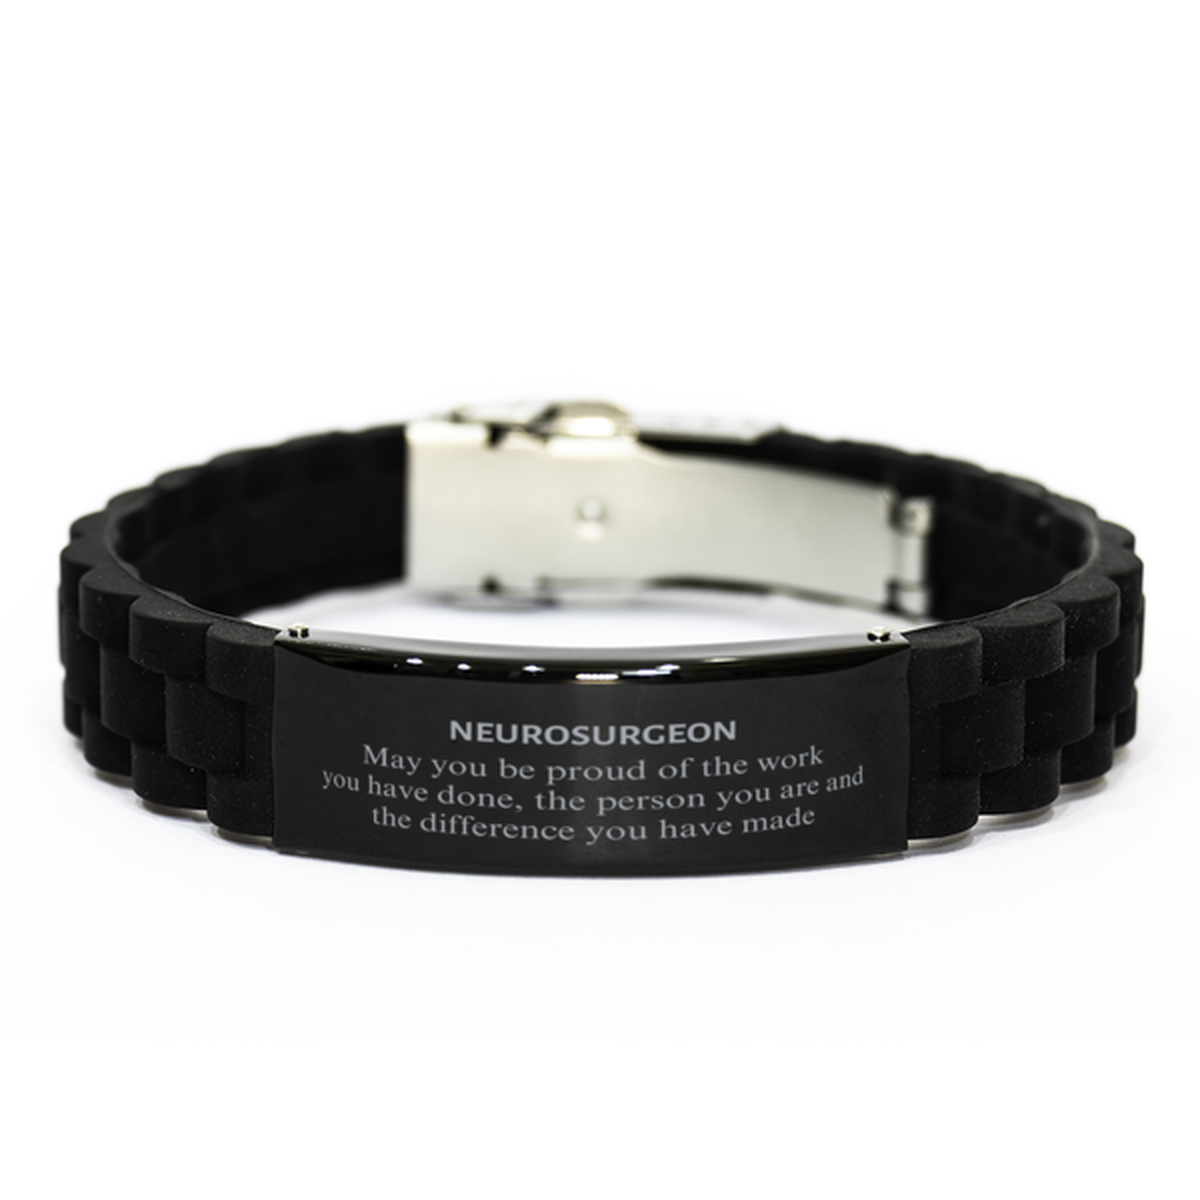 Neurosurgeon May you be proud of the work you have done, Retirement Neurosurgeon Black Glidelock Clasp Bracelet for Colleague Appreciation Gifts Amazing for Neurosurgeon